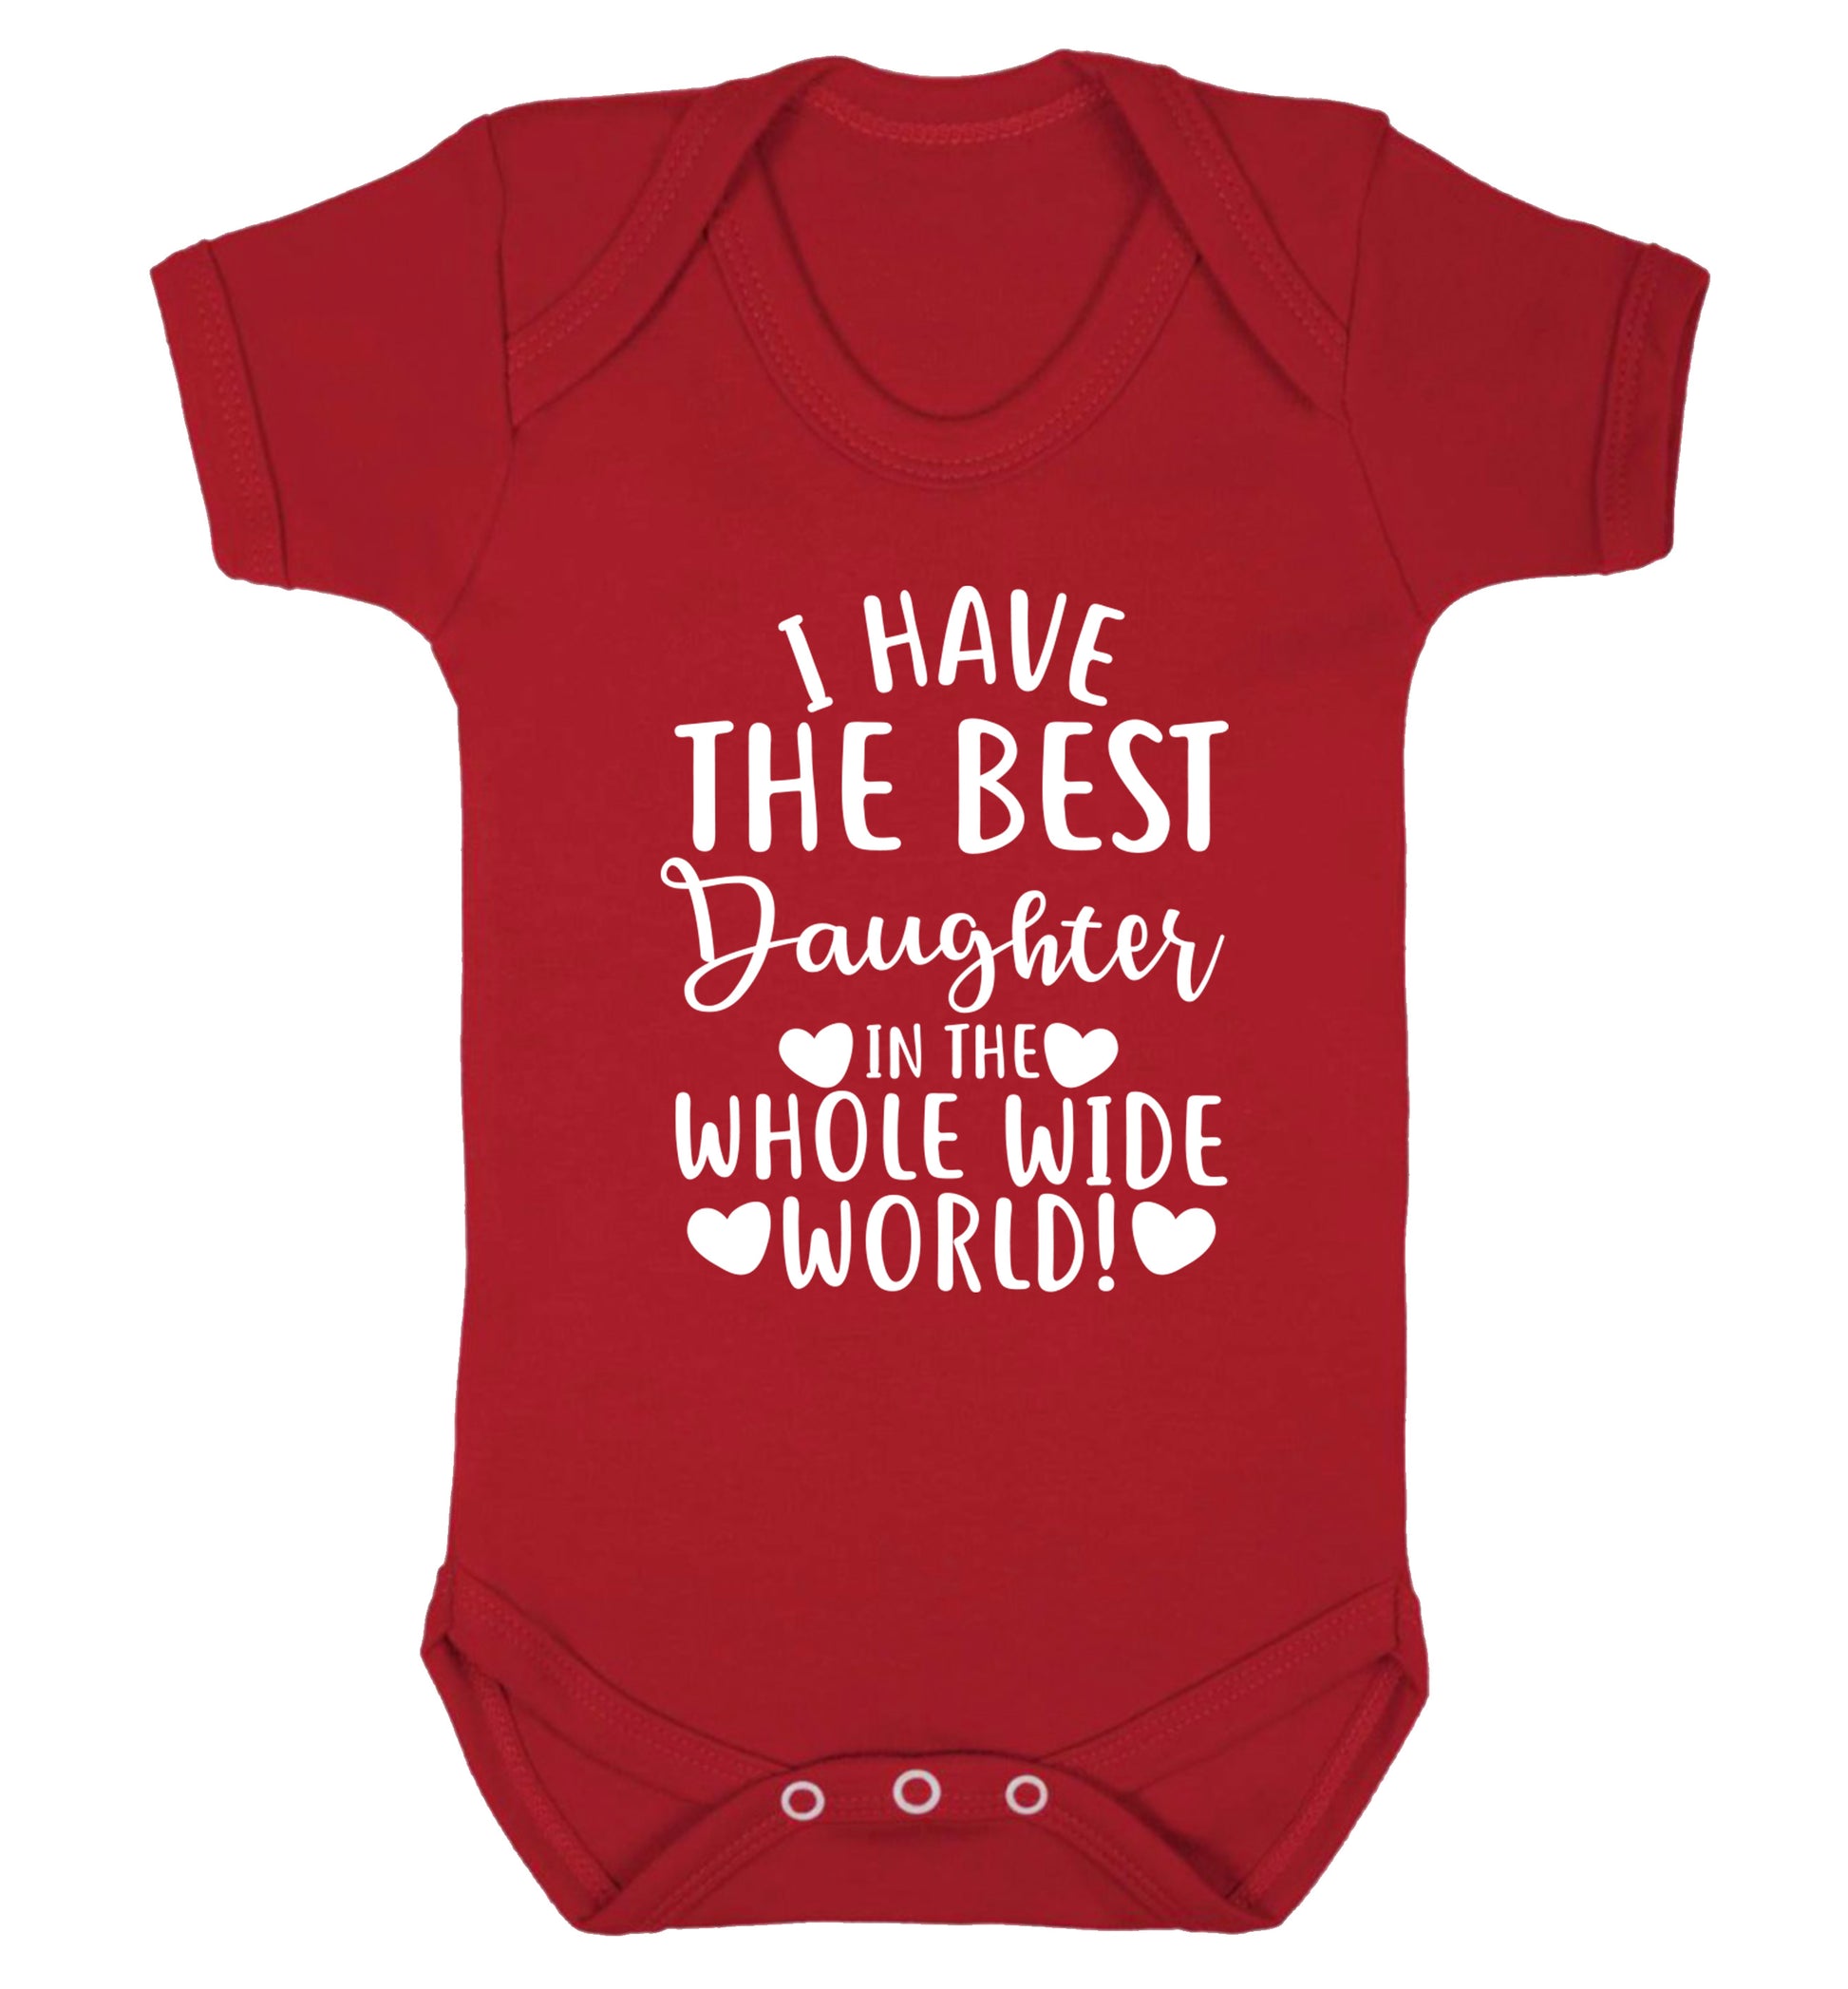 I have the best daughter in the whole wide world! Baby Vest red 18-24 months